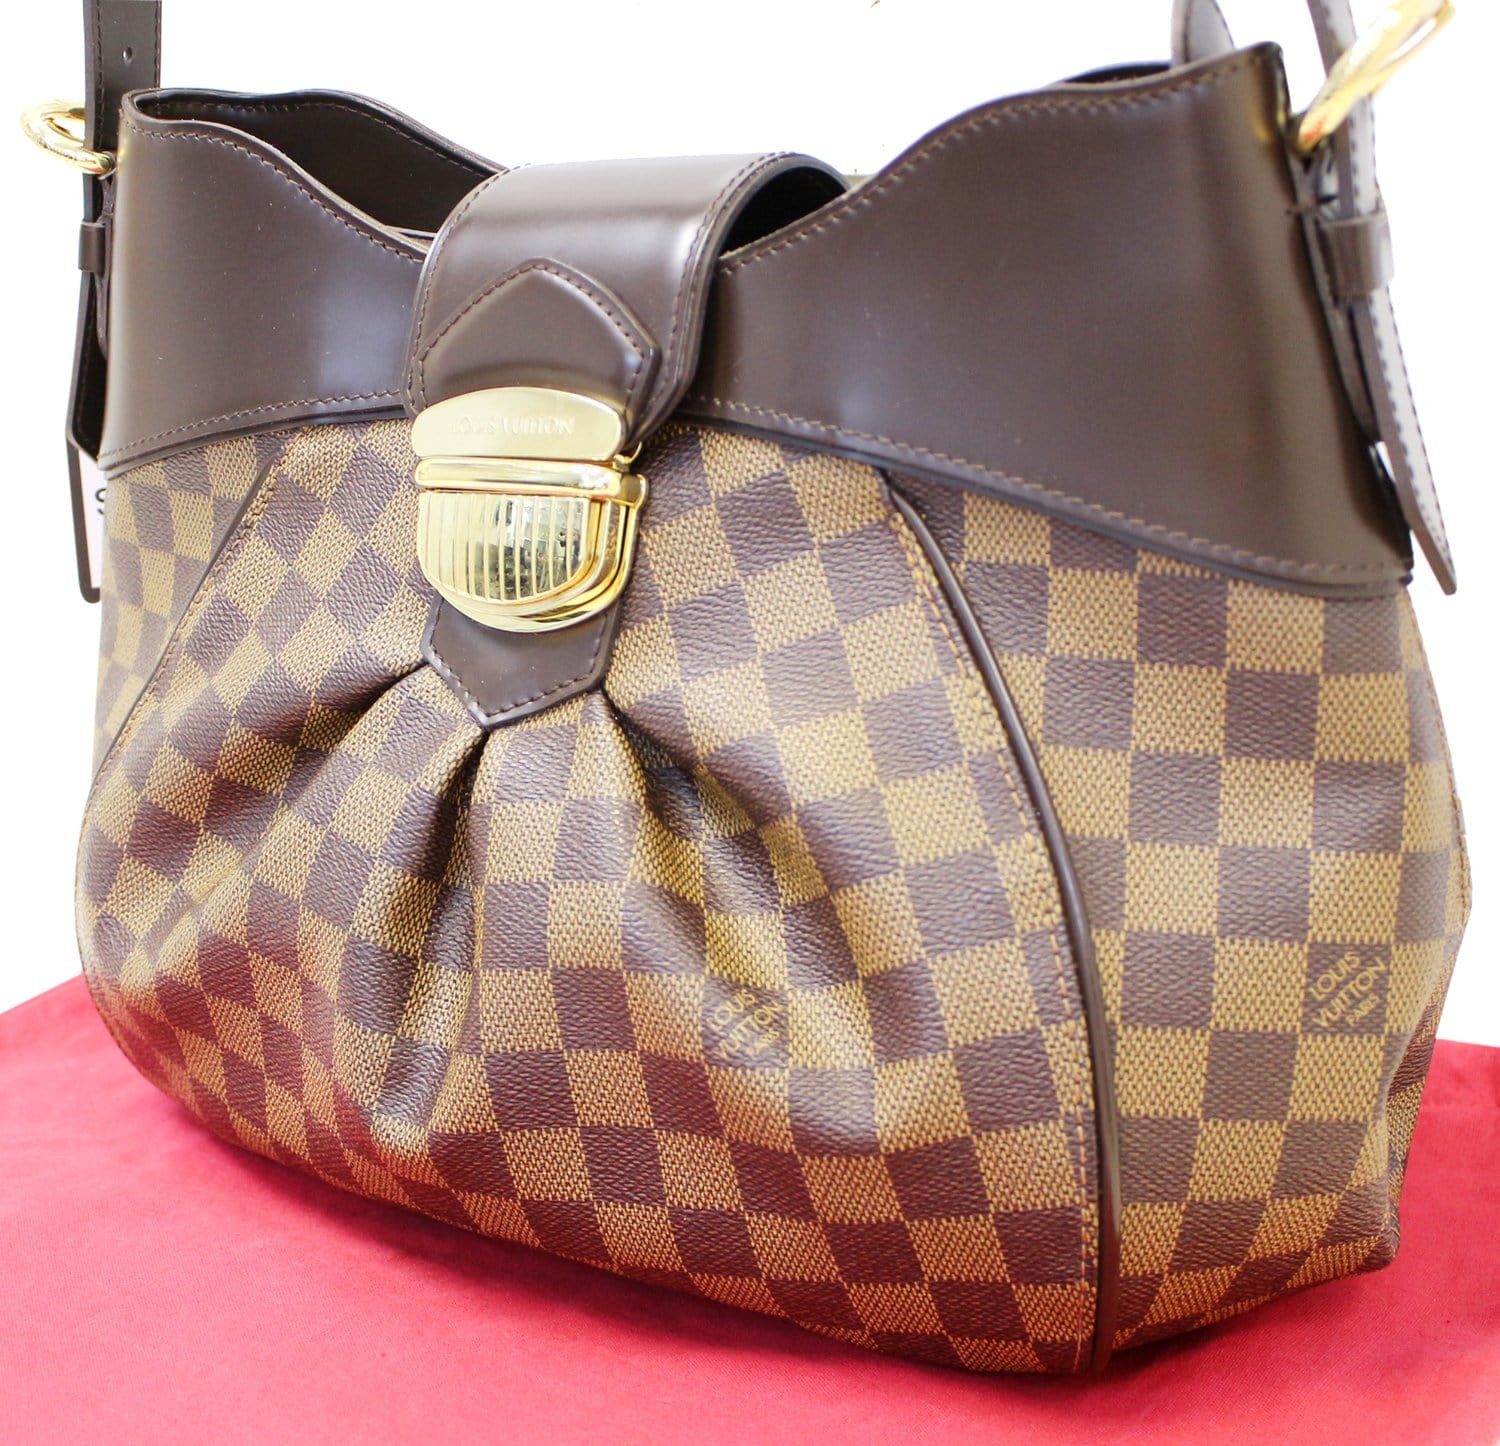 Available $799 + Free USA shipping Louis Vuitton Sistina MM in